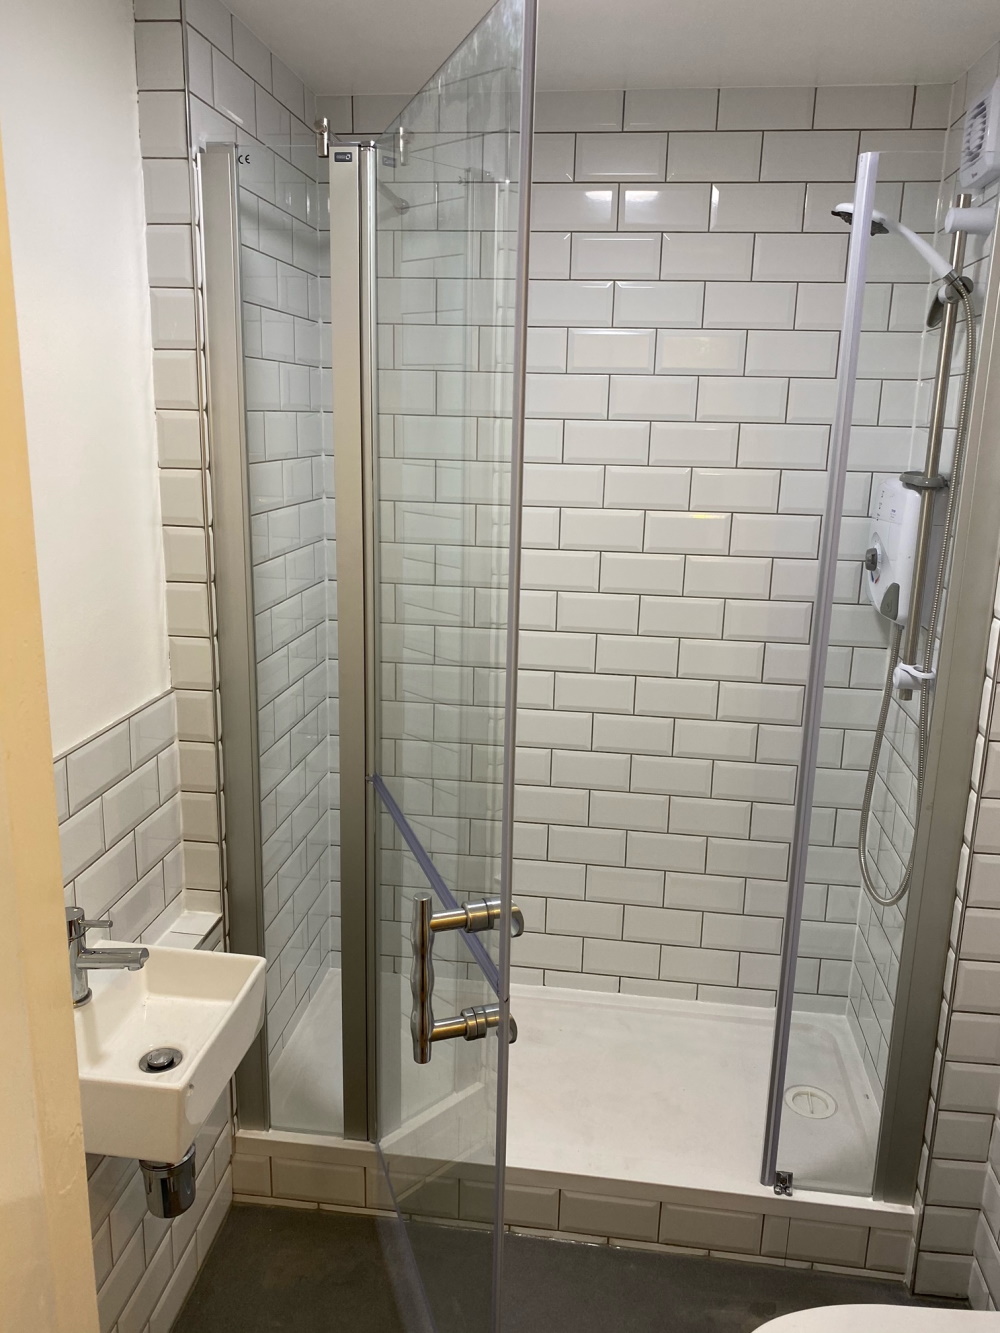 Bathrooms Before and After | Electrician London Ltd